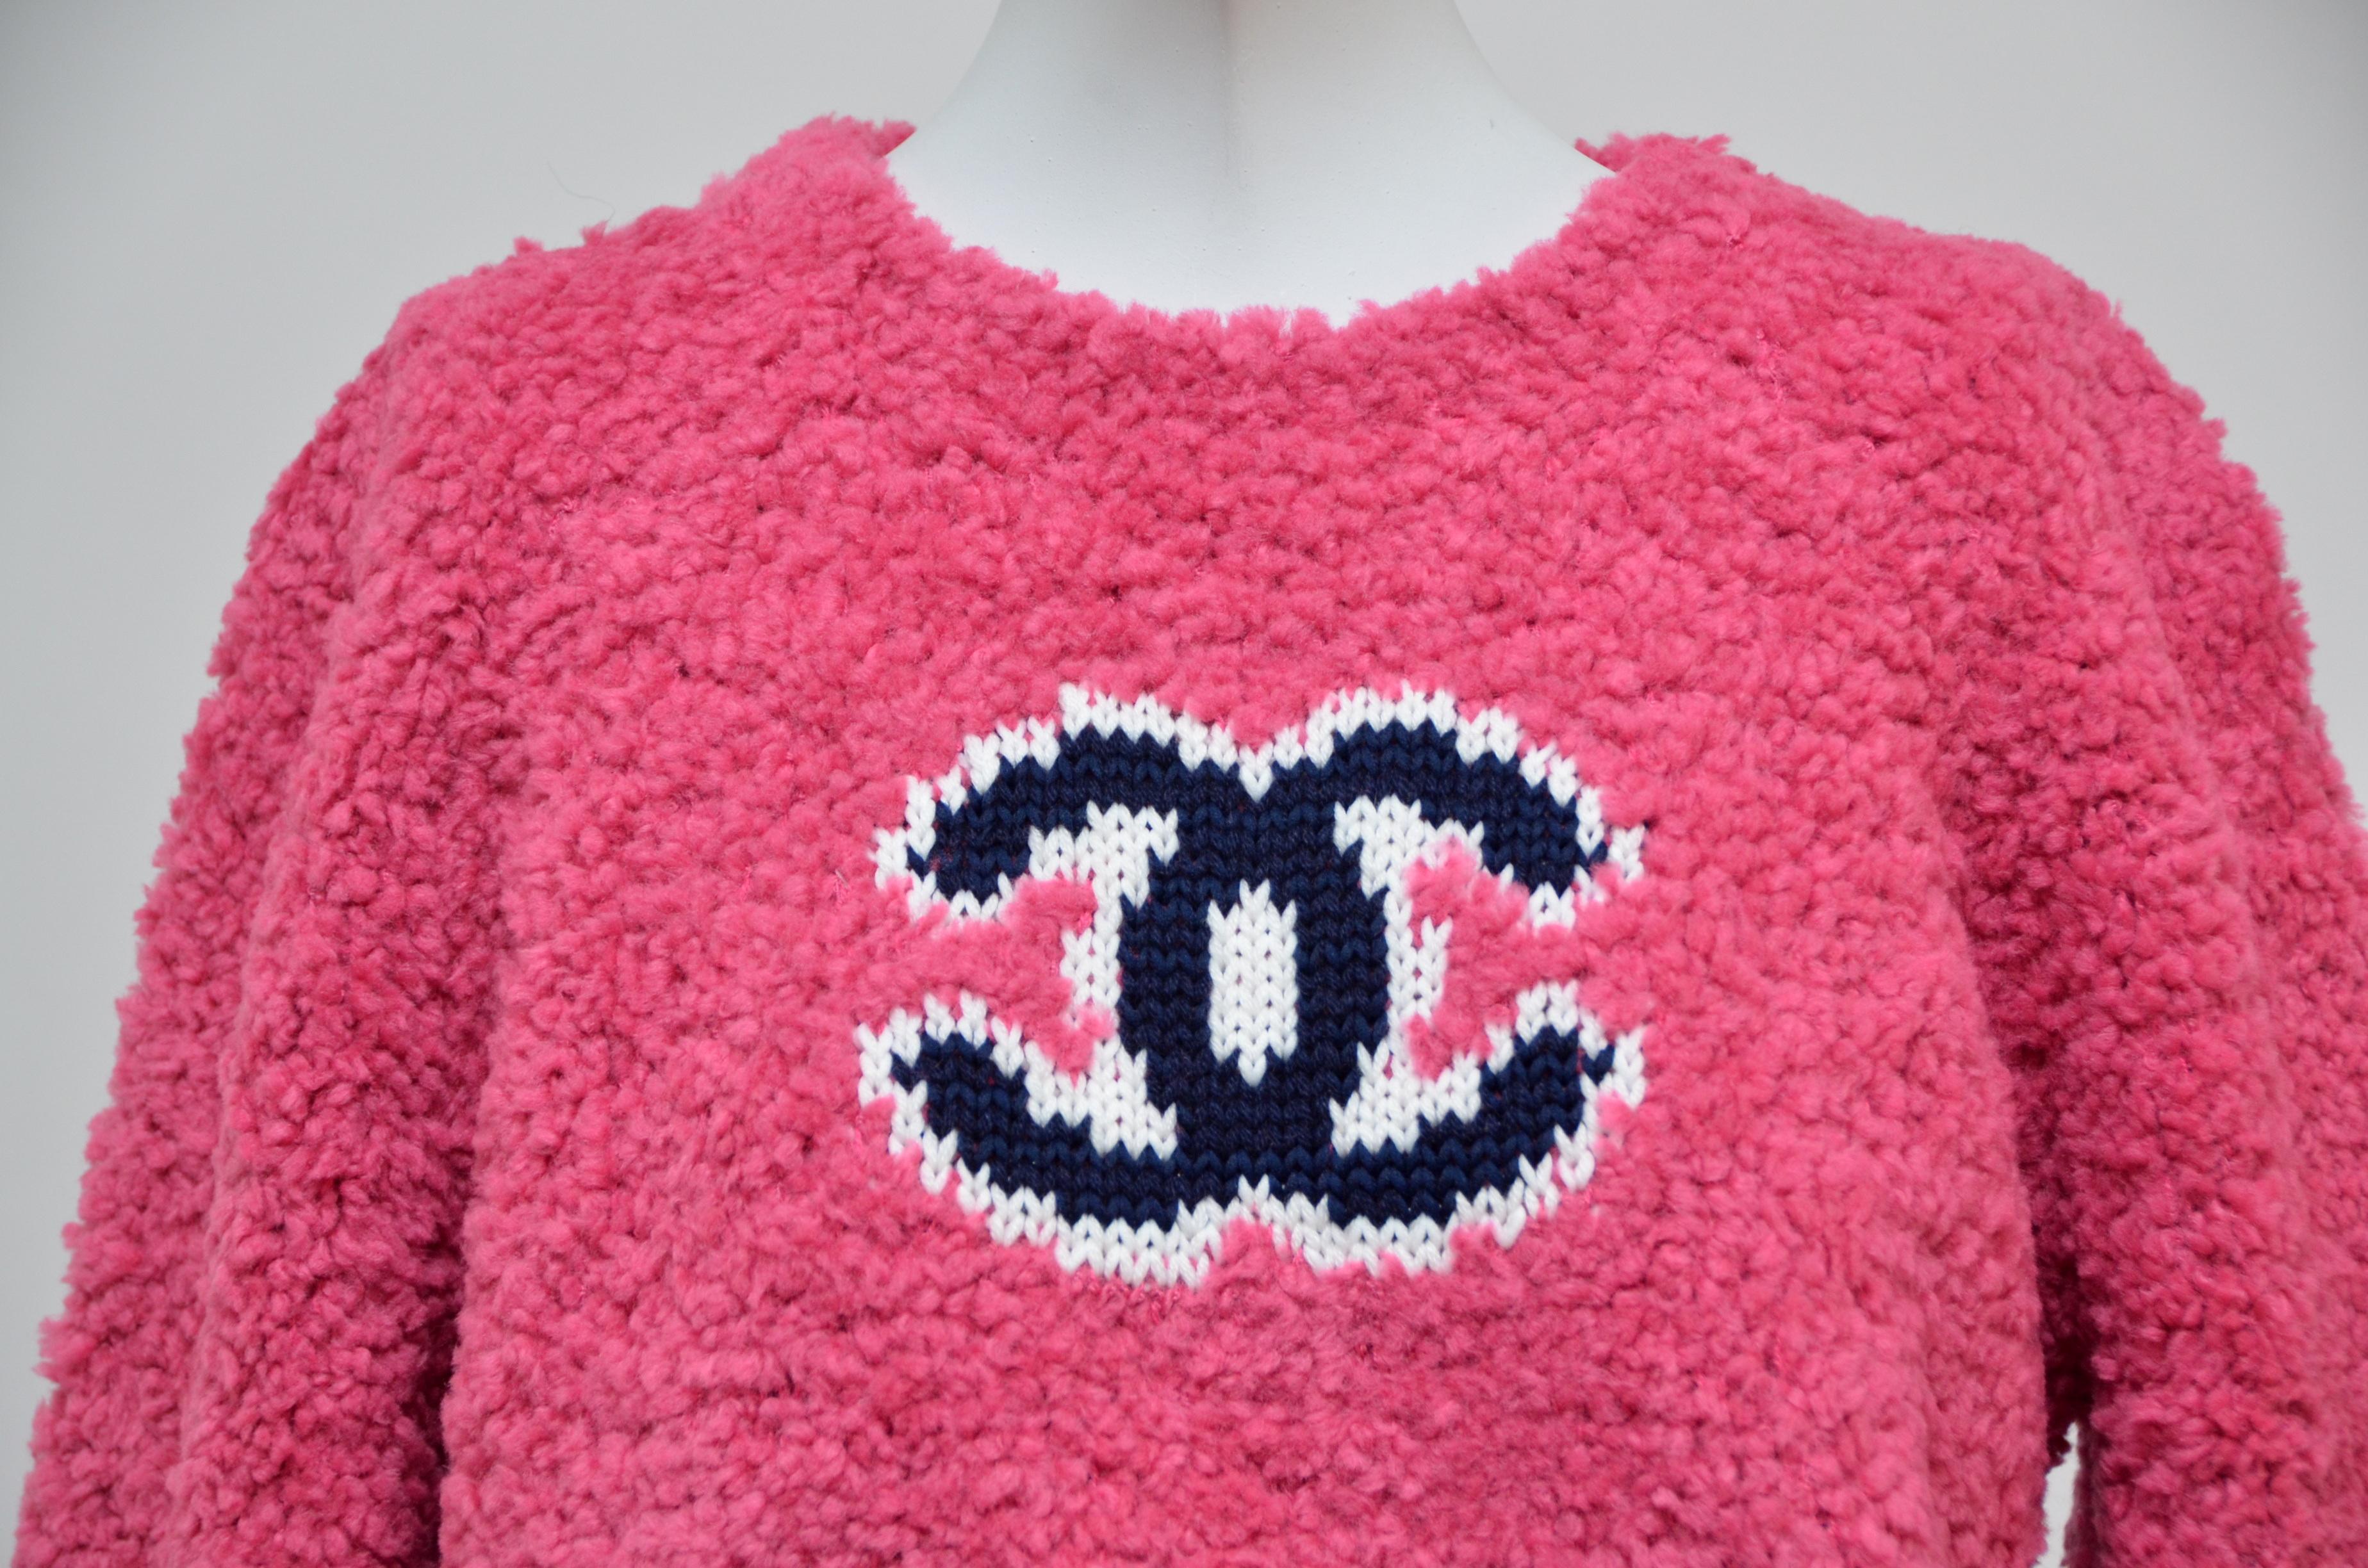 Chanel teddy sweater in pink tone 
Due to flashlight color tone might vary in person.
New with tags.Original receipt with personal info covered is available to purchaser upon request
Size 40FR.Please familiarize yourself with Chanel sizing before